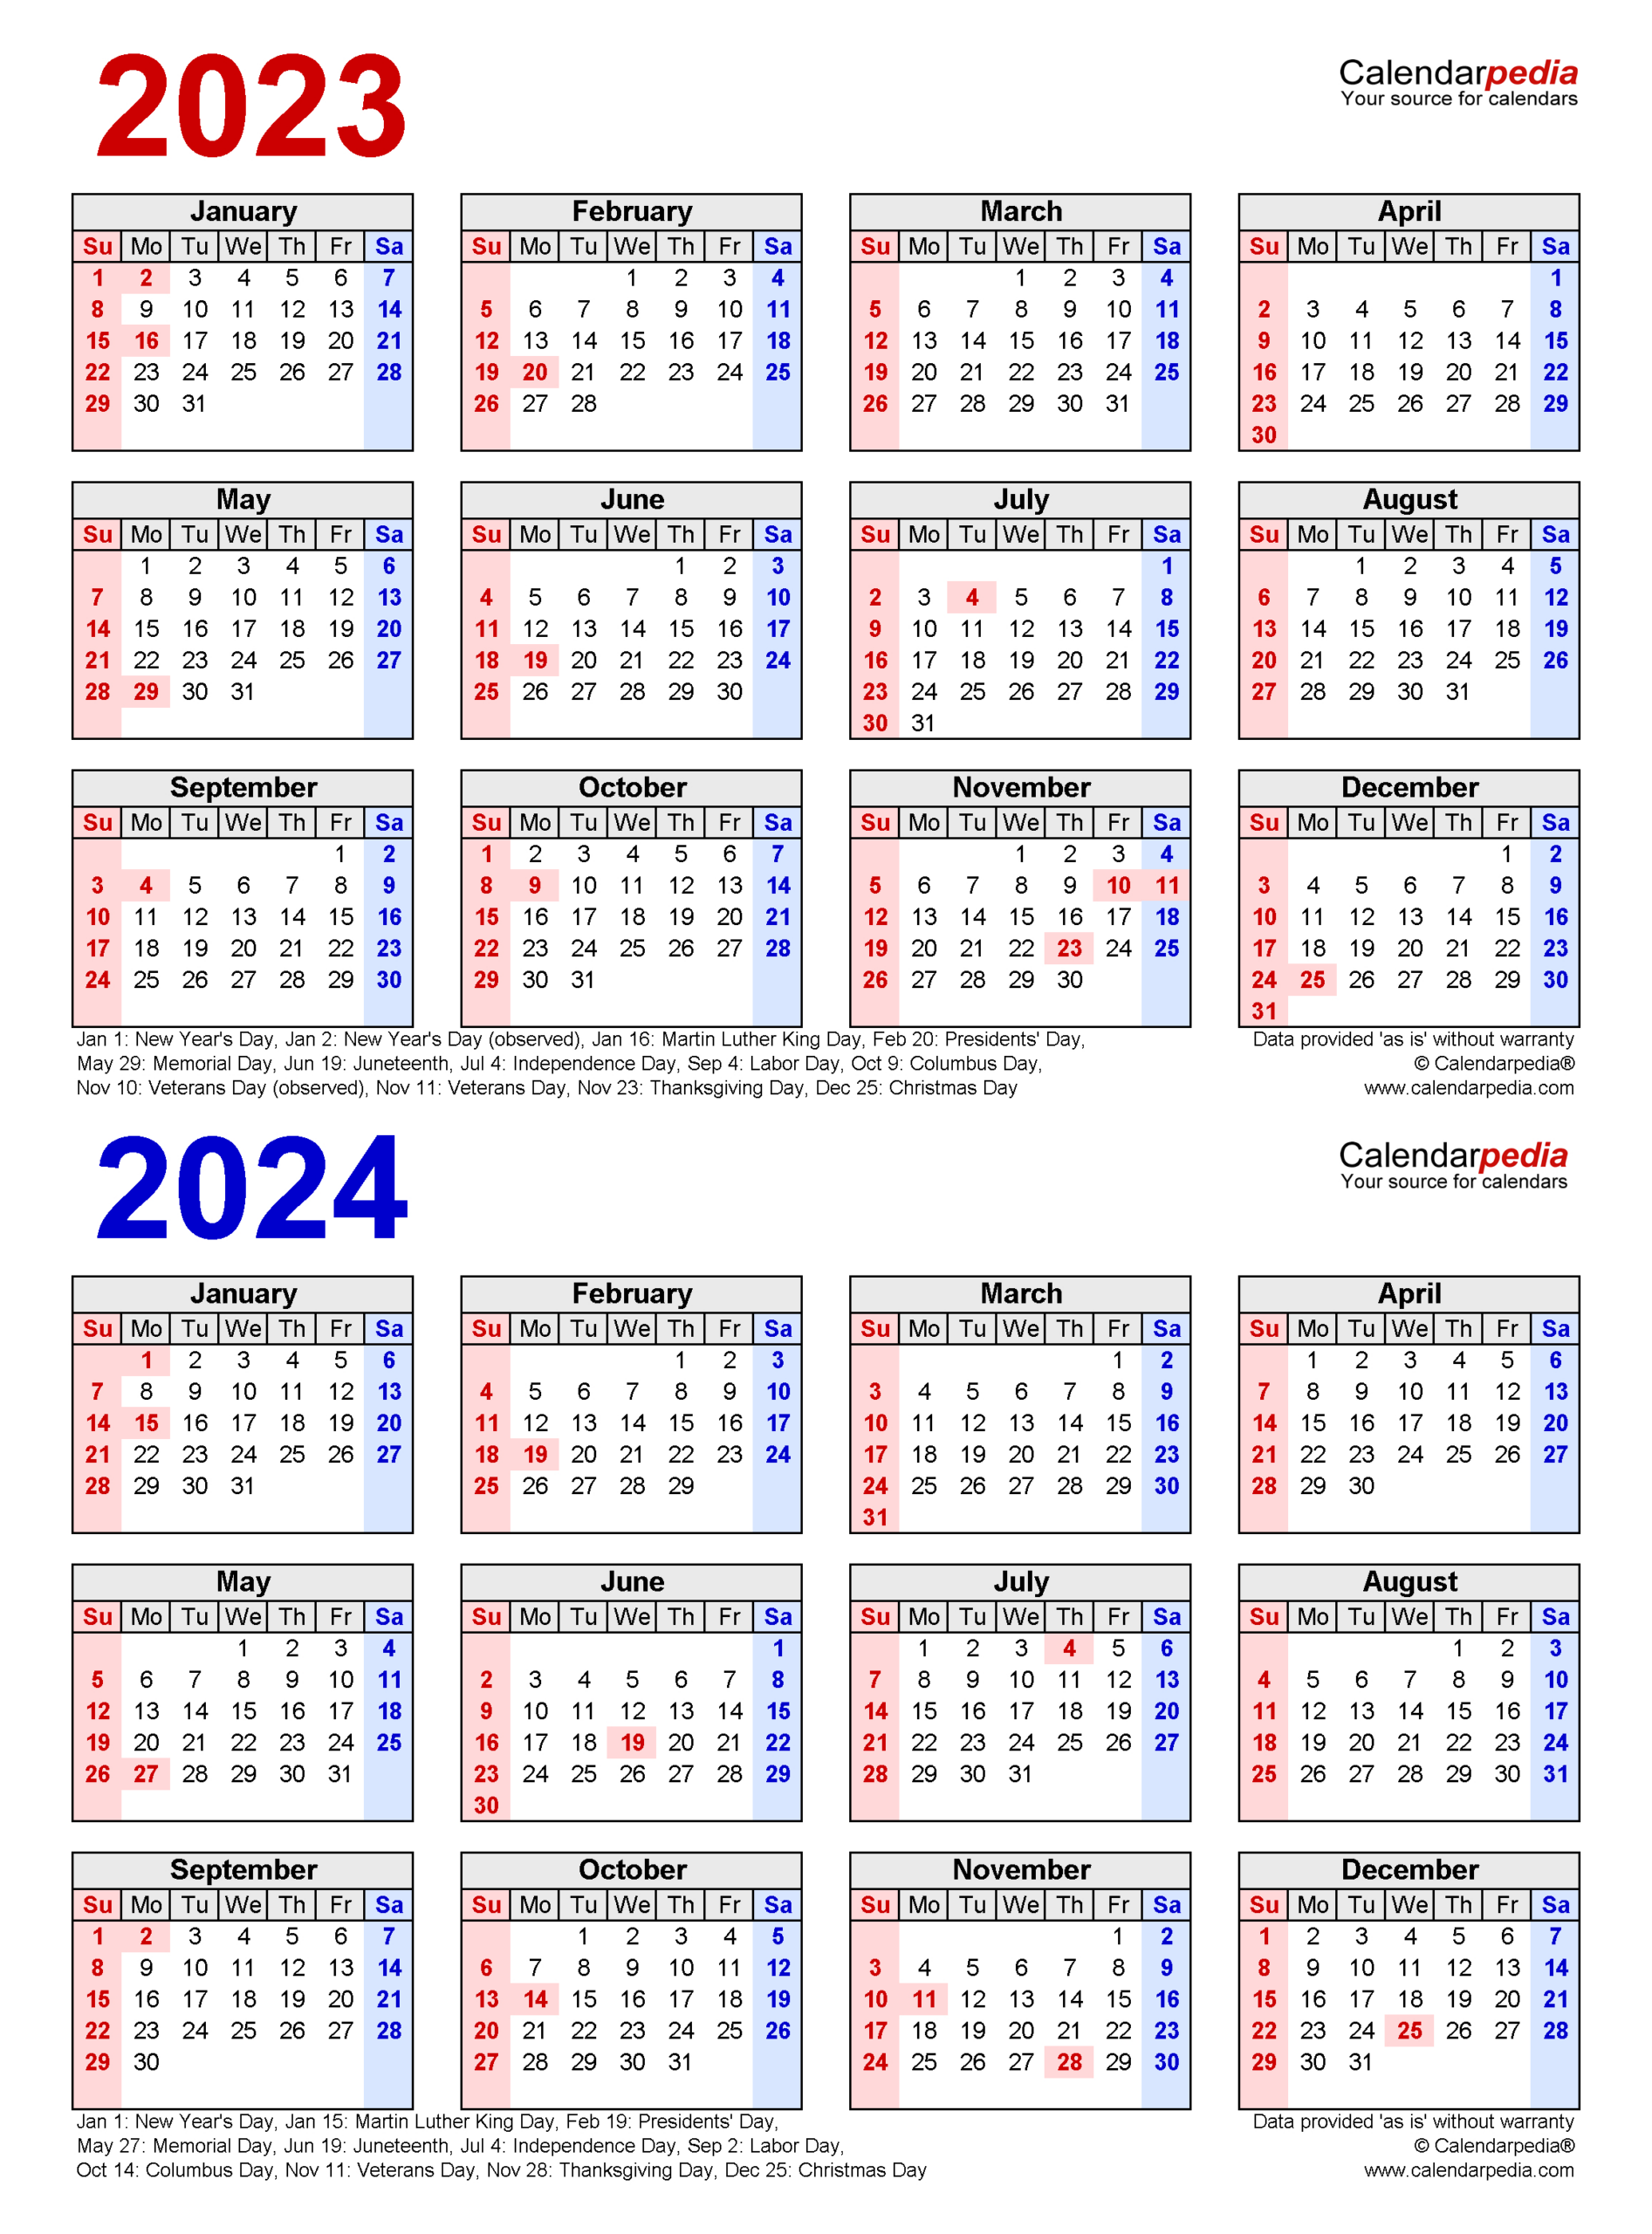 2023-2024 Two Year Calendar - Free Printable Excel Templates | 2023 Calendar 2024 Printable Excel